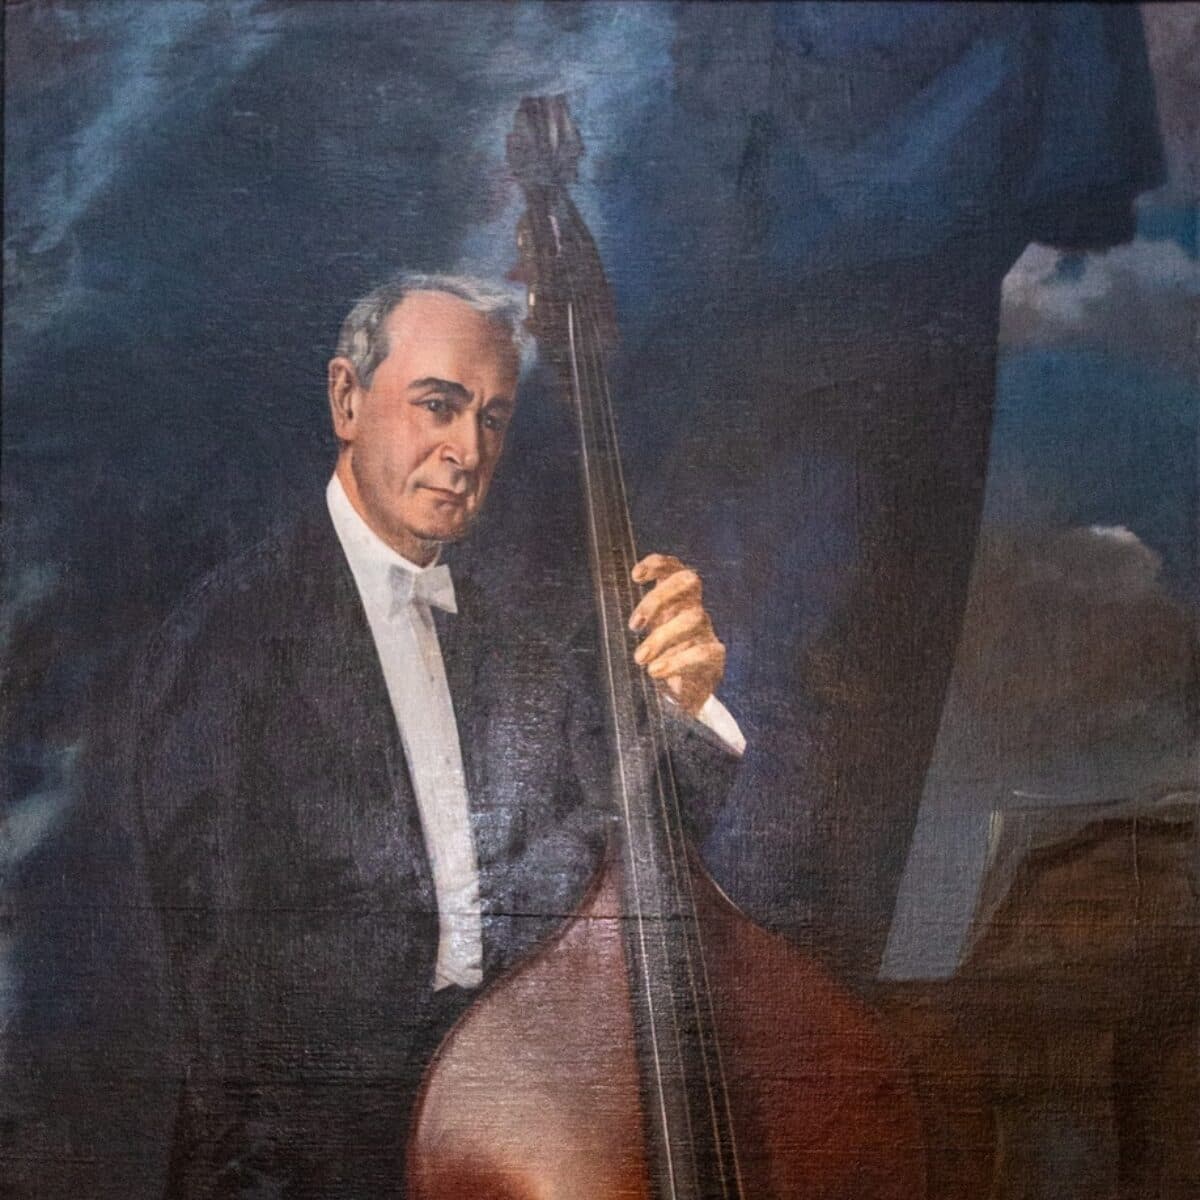 Serge Koussevitzky Painting by Basil Schoukhaeff, Paris, 1934 Photograph of painting by Robert Torres